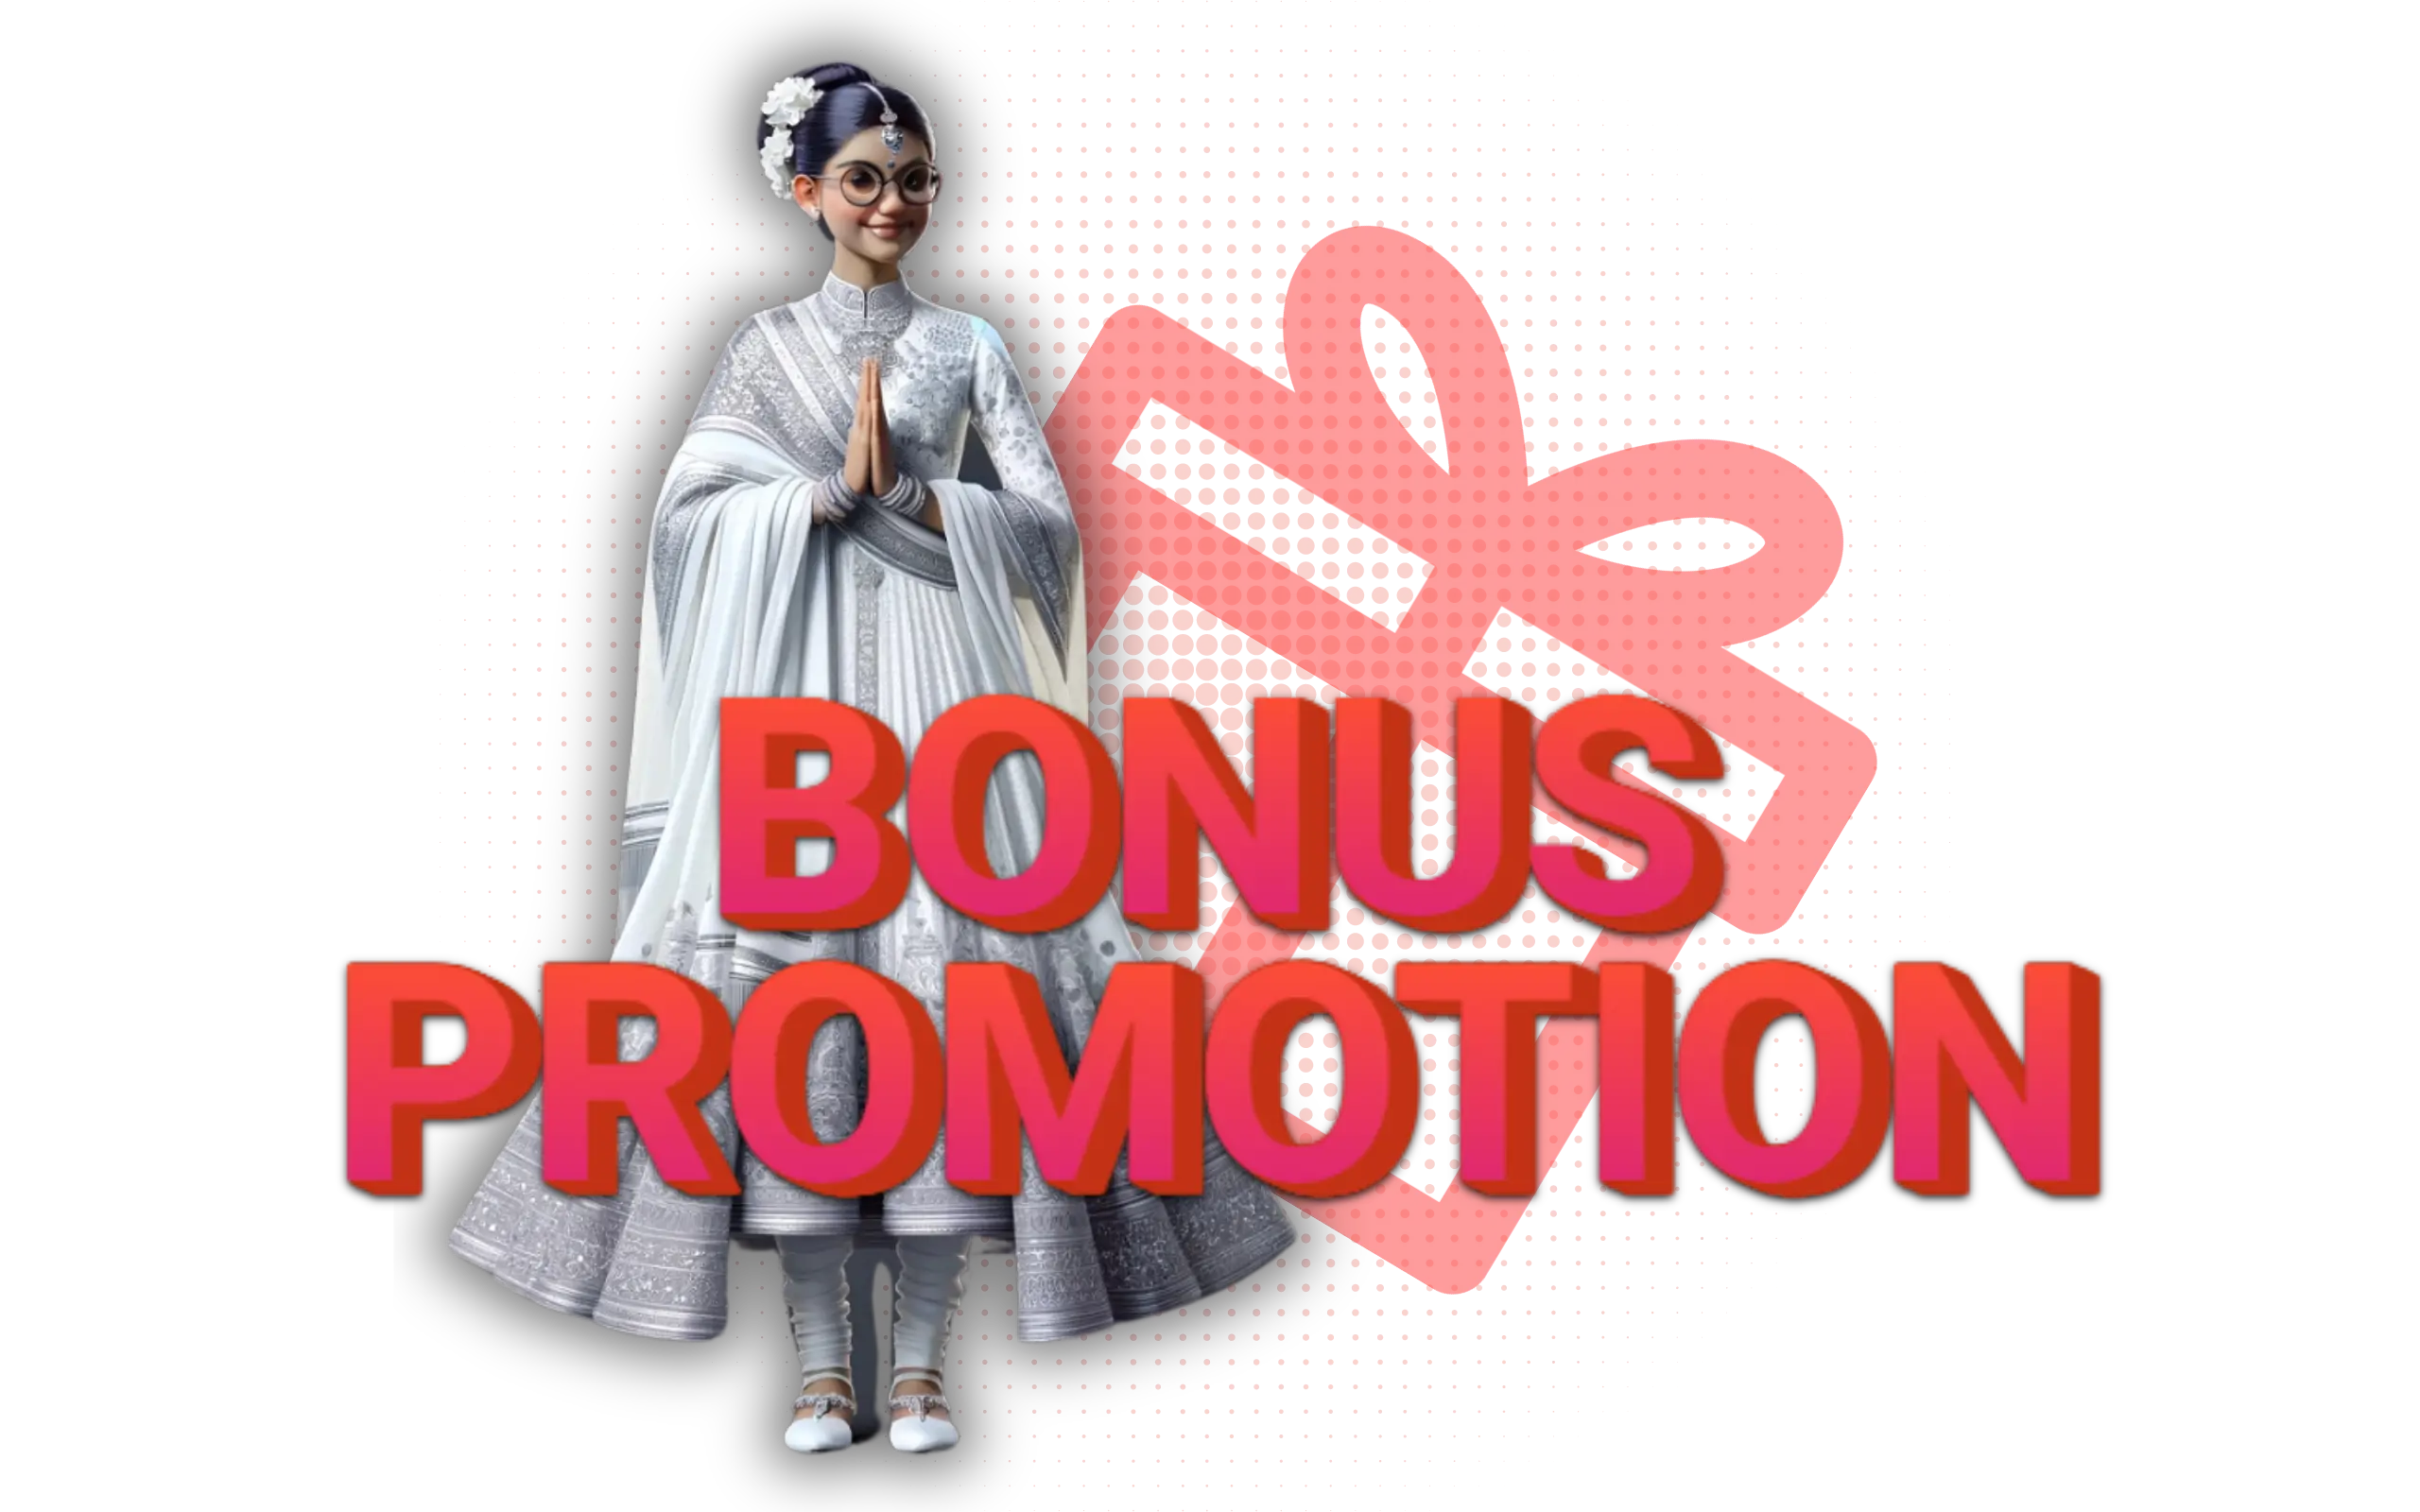 lucknow games bonus and promotion icon